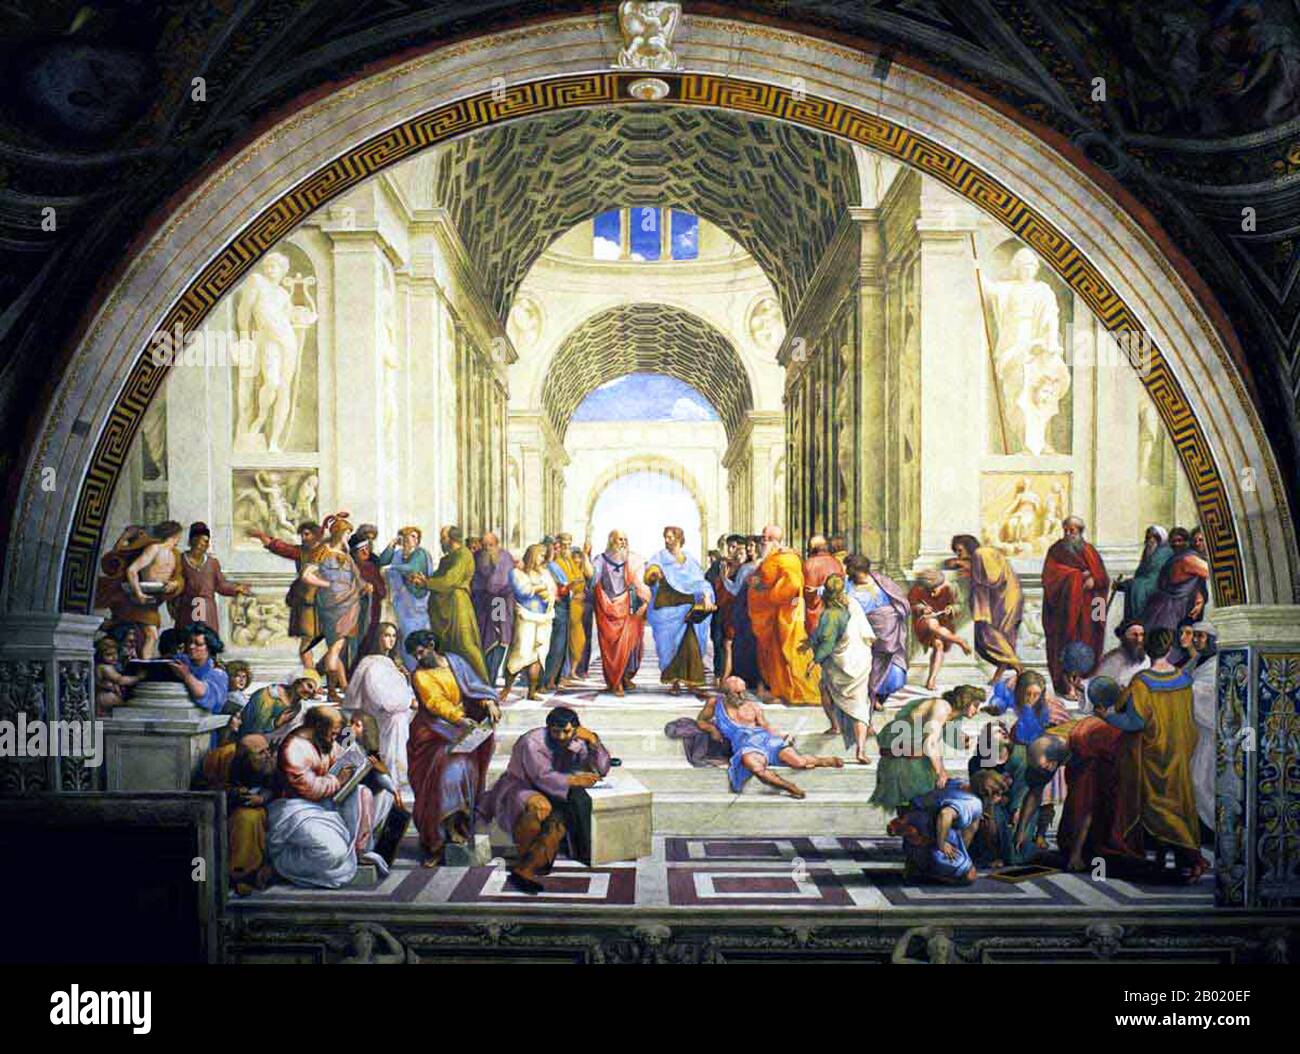 The School of Athens, or Scuola di Atene in Italian, is one of the most famous frescoes by the Italian Renaissance artist Raphael. It was painted between 1510 and 1511 as a part of Raphael's commission to decorate with frescoes the rooms now known as the Stanze di Raffaello, in the Apostolic Palace in the Vatican.  The Stanza della Segnatura was the first of the rooms to be decorated, and The School of Athens the second painting to be finished there, after La Disputa, on the opposite wall. The picture has long been seen as Raphael's masterpiece and the perfect embodiment of the classical spiri Stock Photo